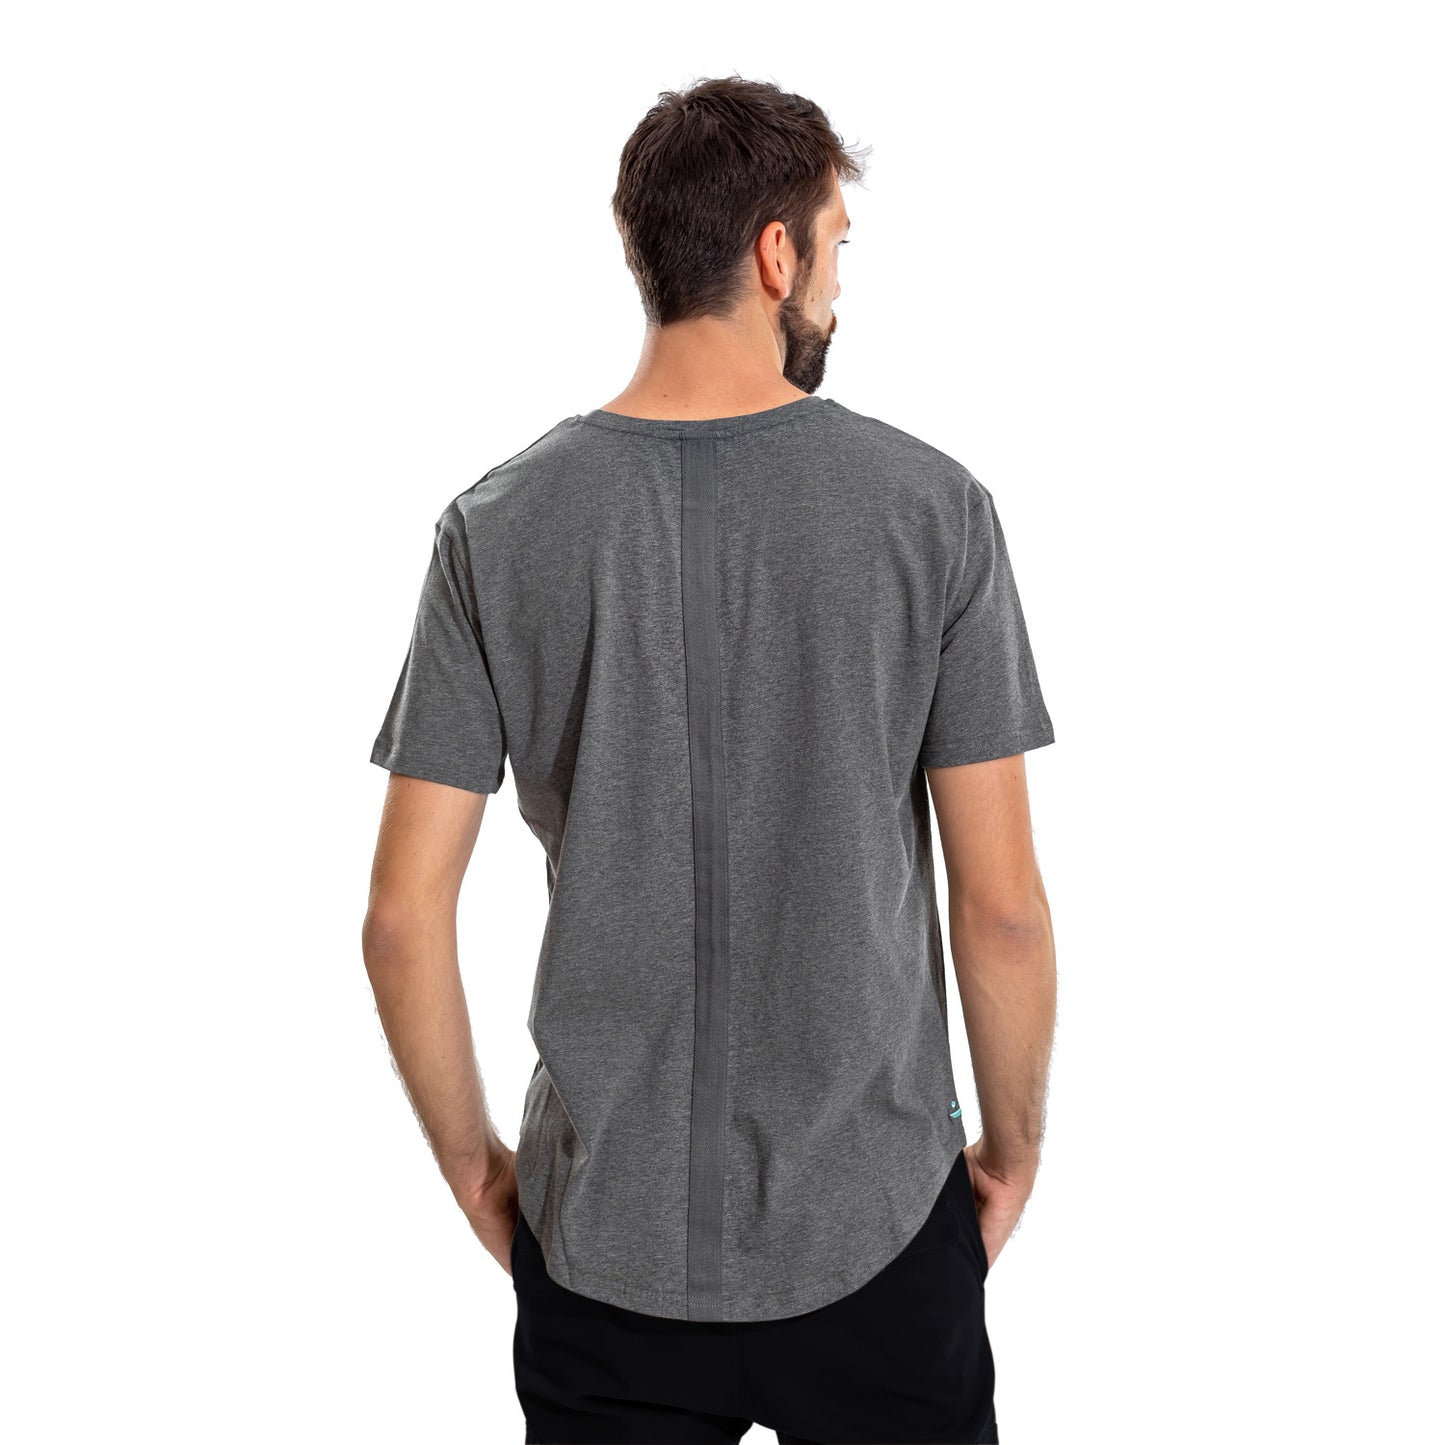 grey T-shirt, tee, front pocket, embroidery signature, iconic, back view, Model